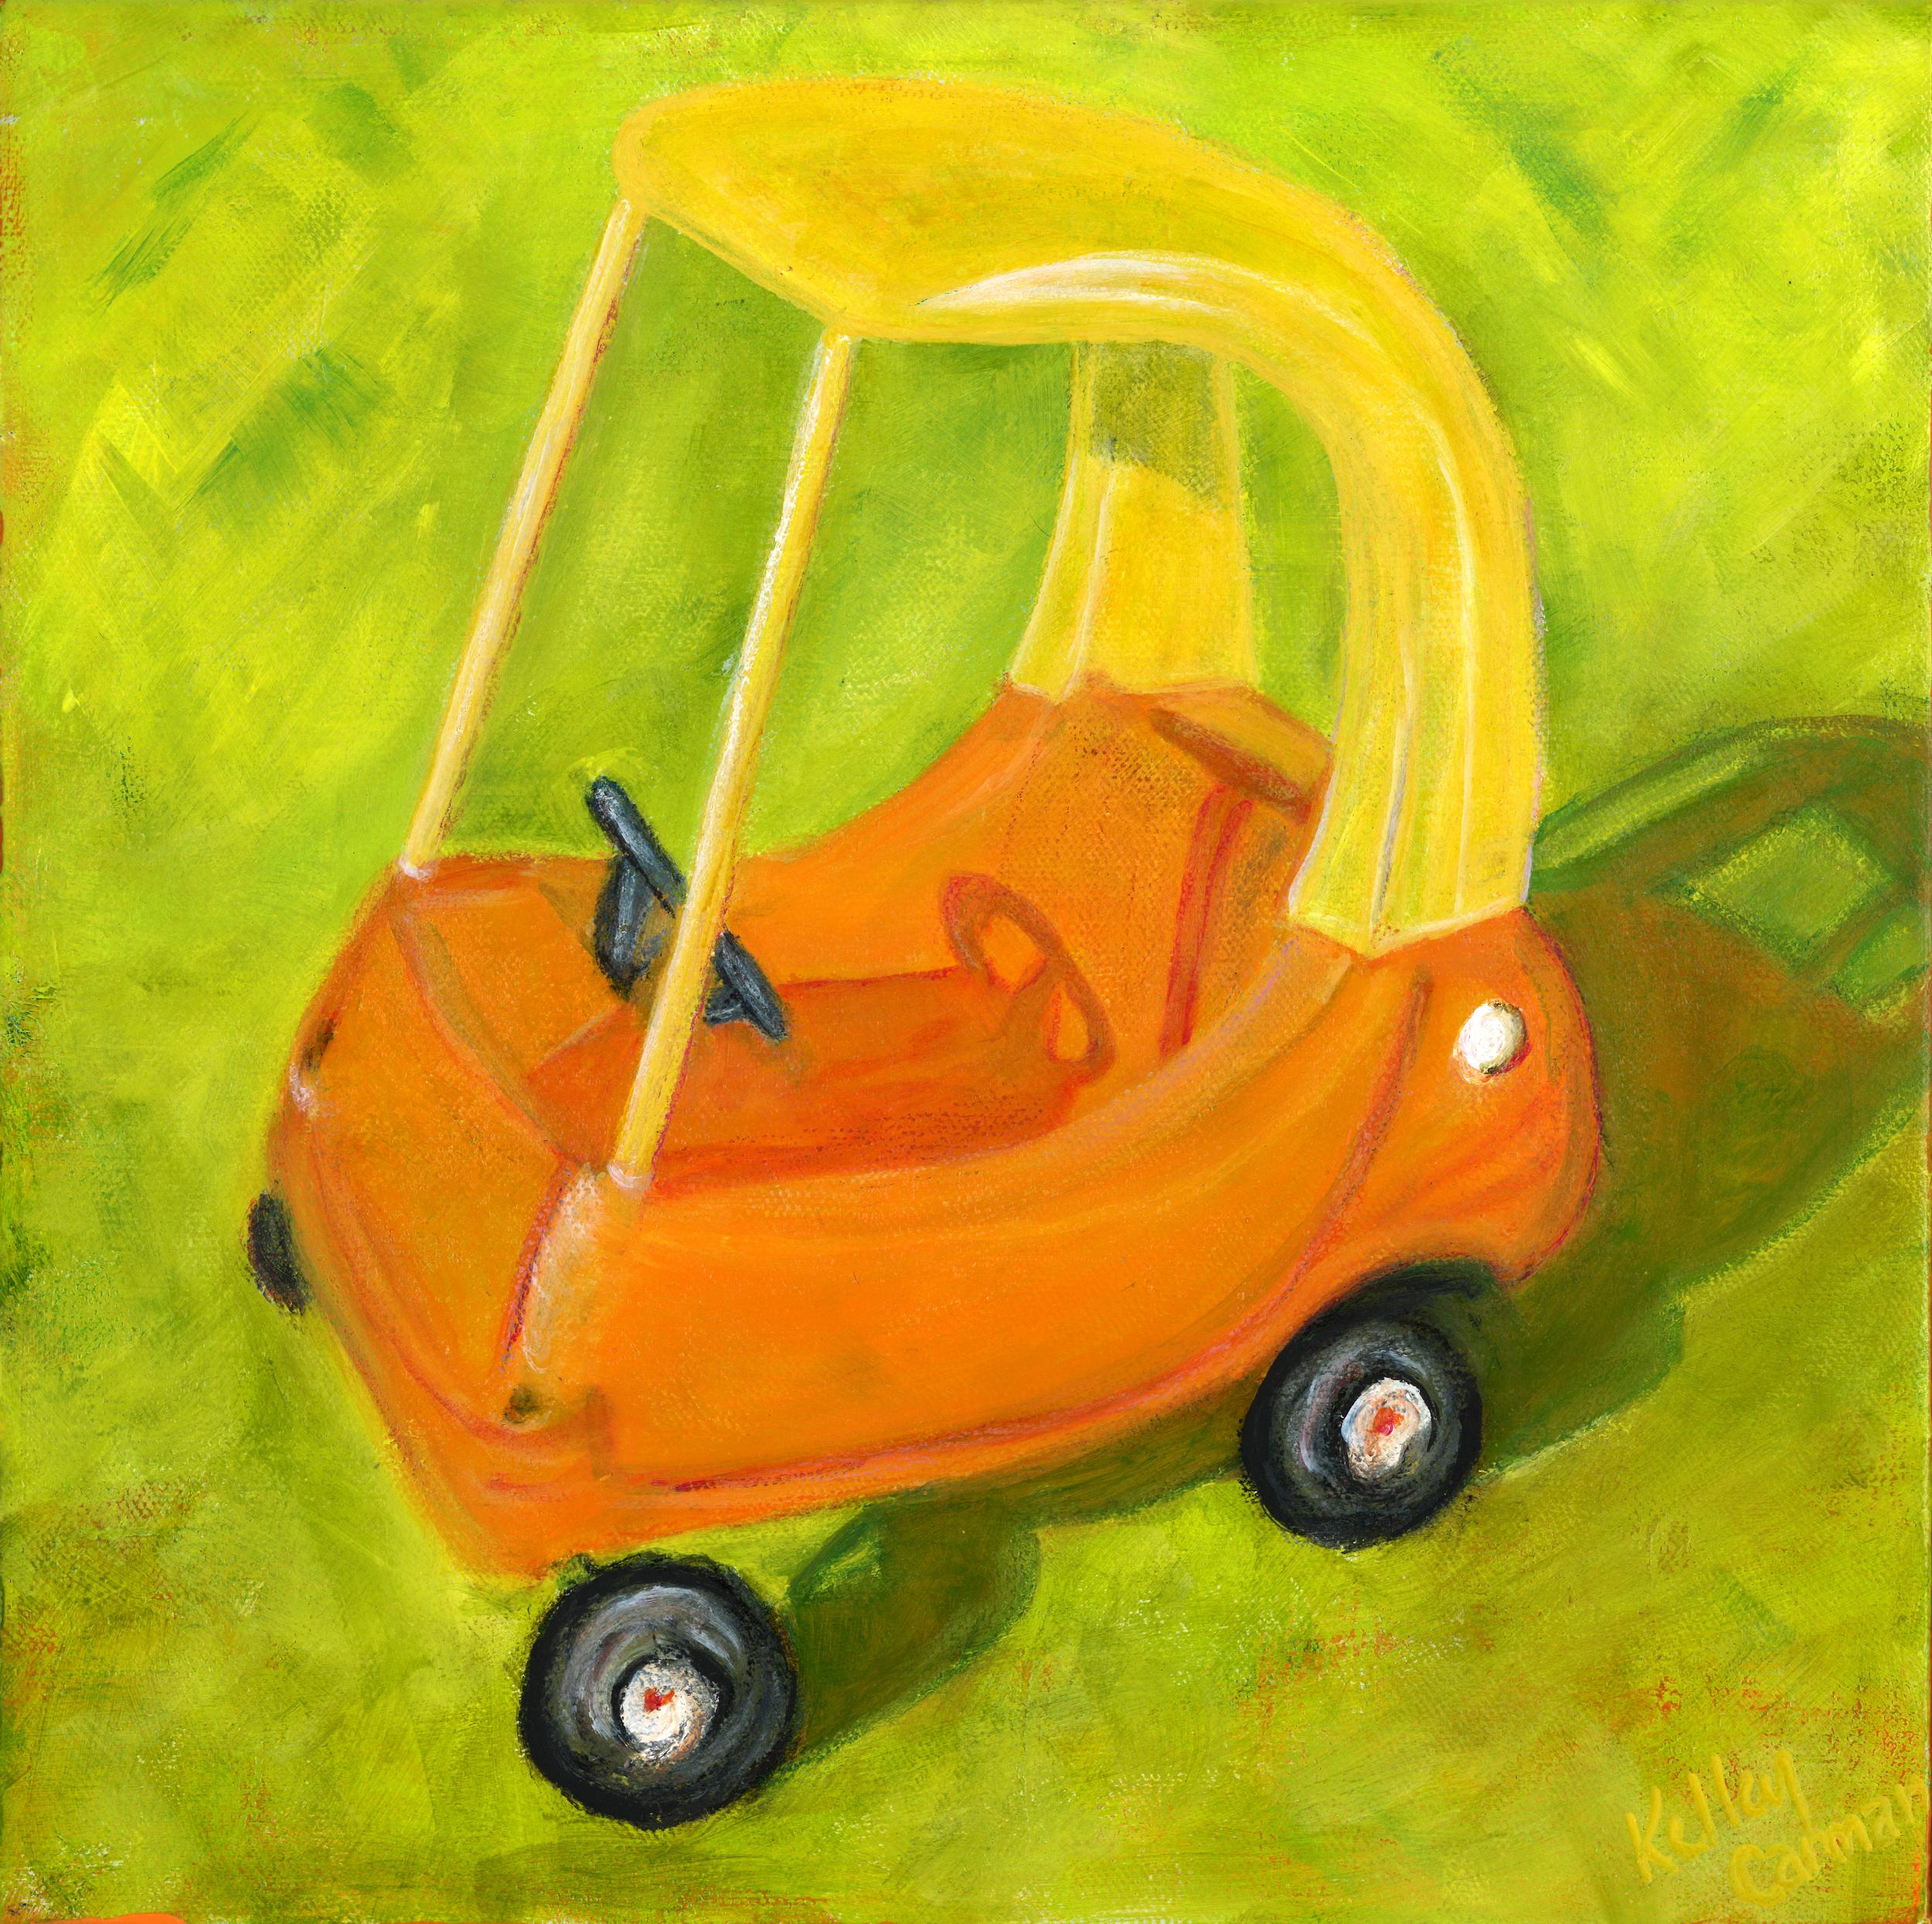 First Car (Figurative, Cozy, Coupe, Yellow, Orange, Green, Car) - Painting by Kelley Carman